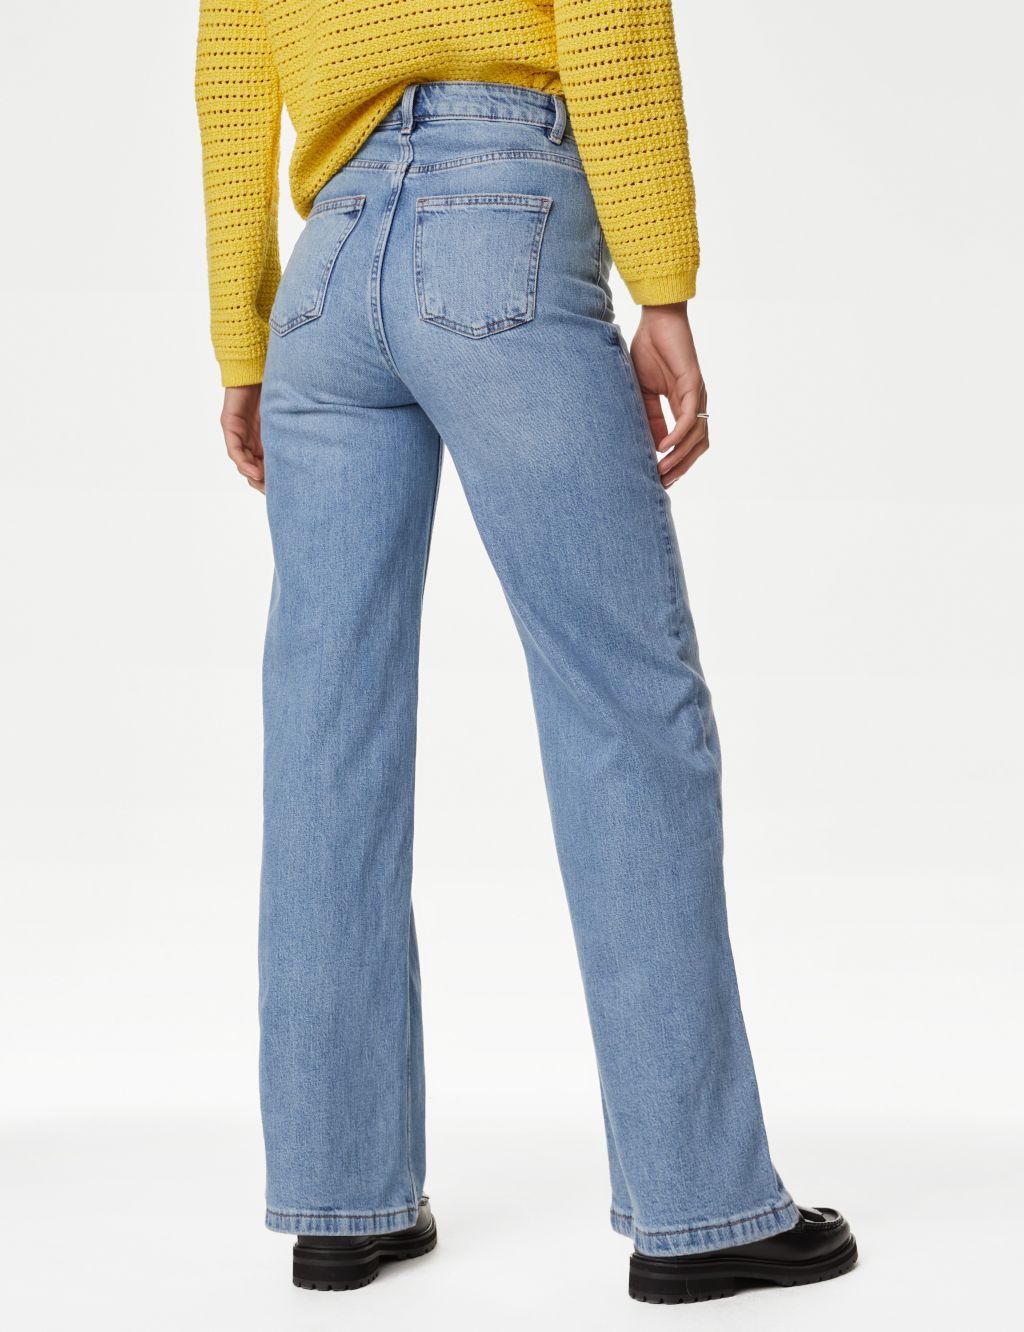 The Wide-Leg Jeans image 5